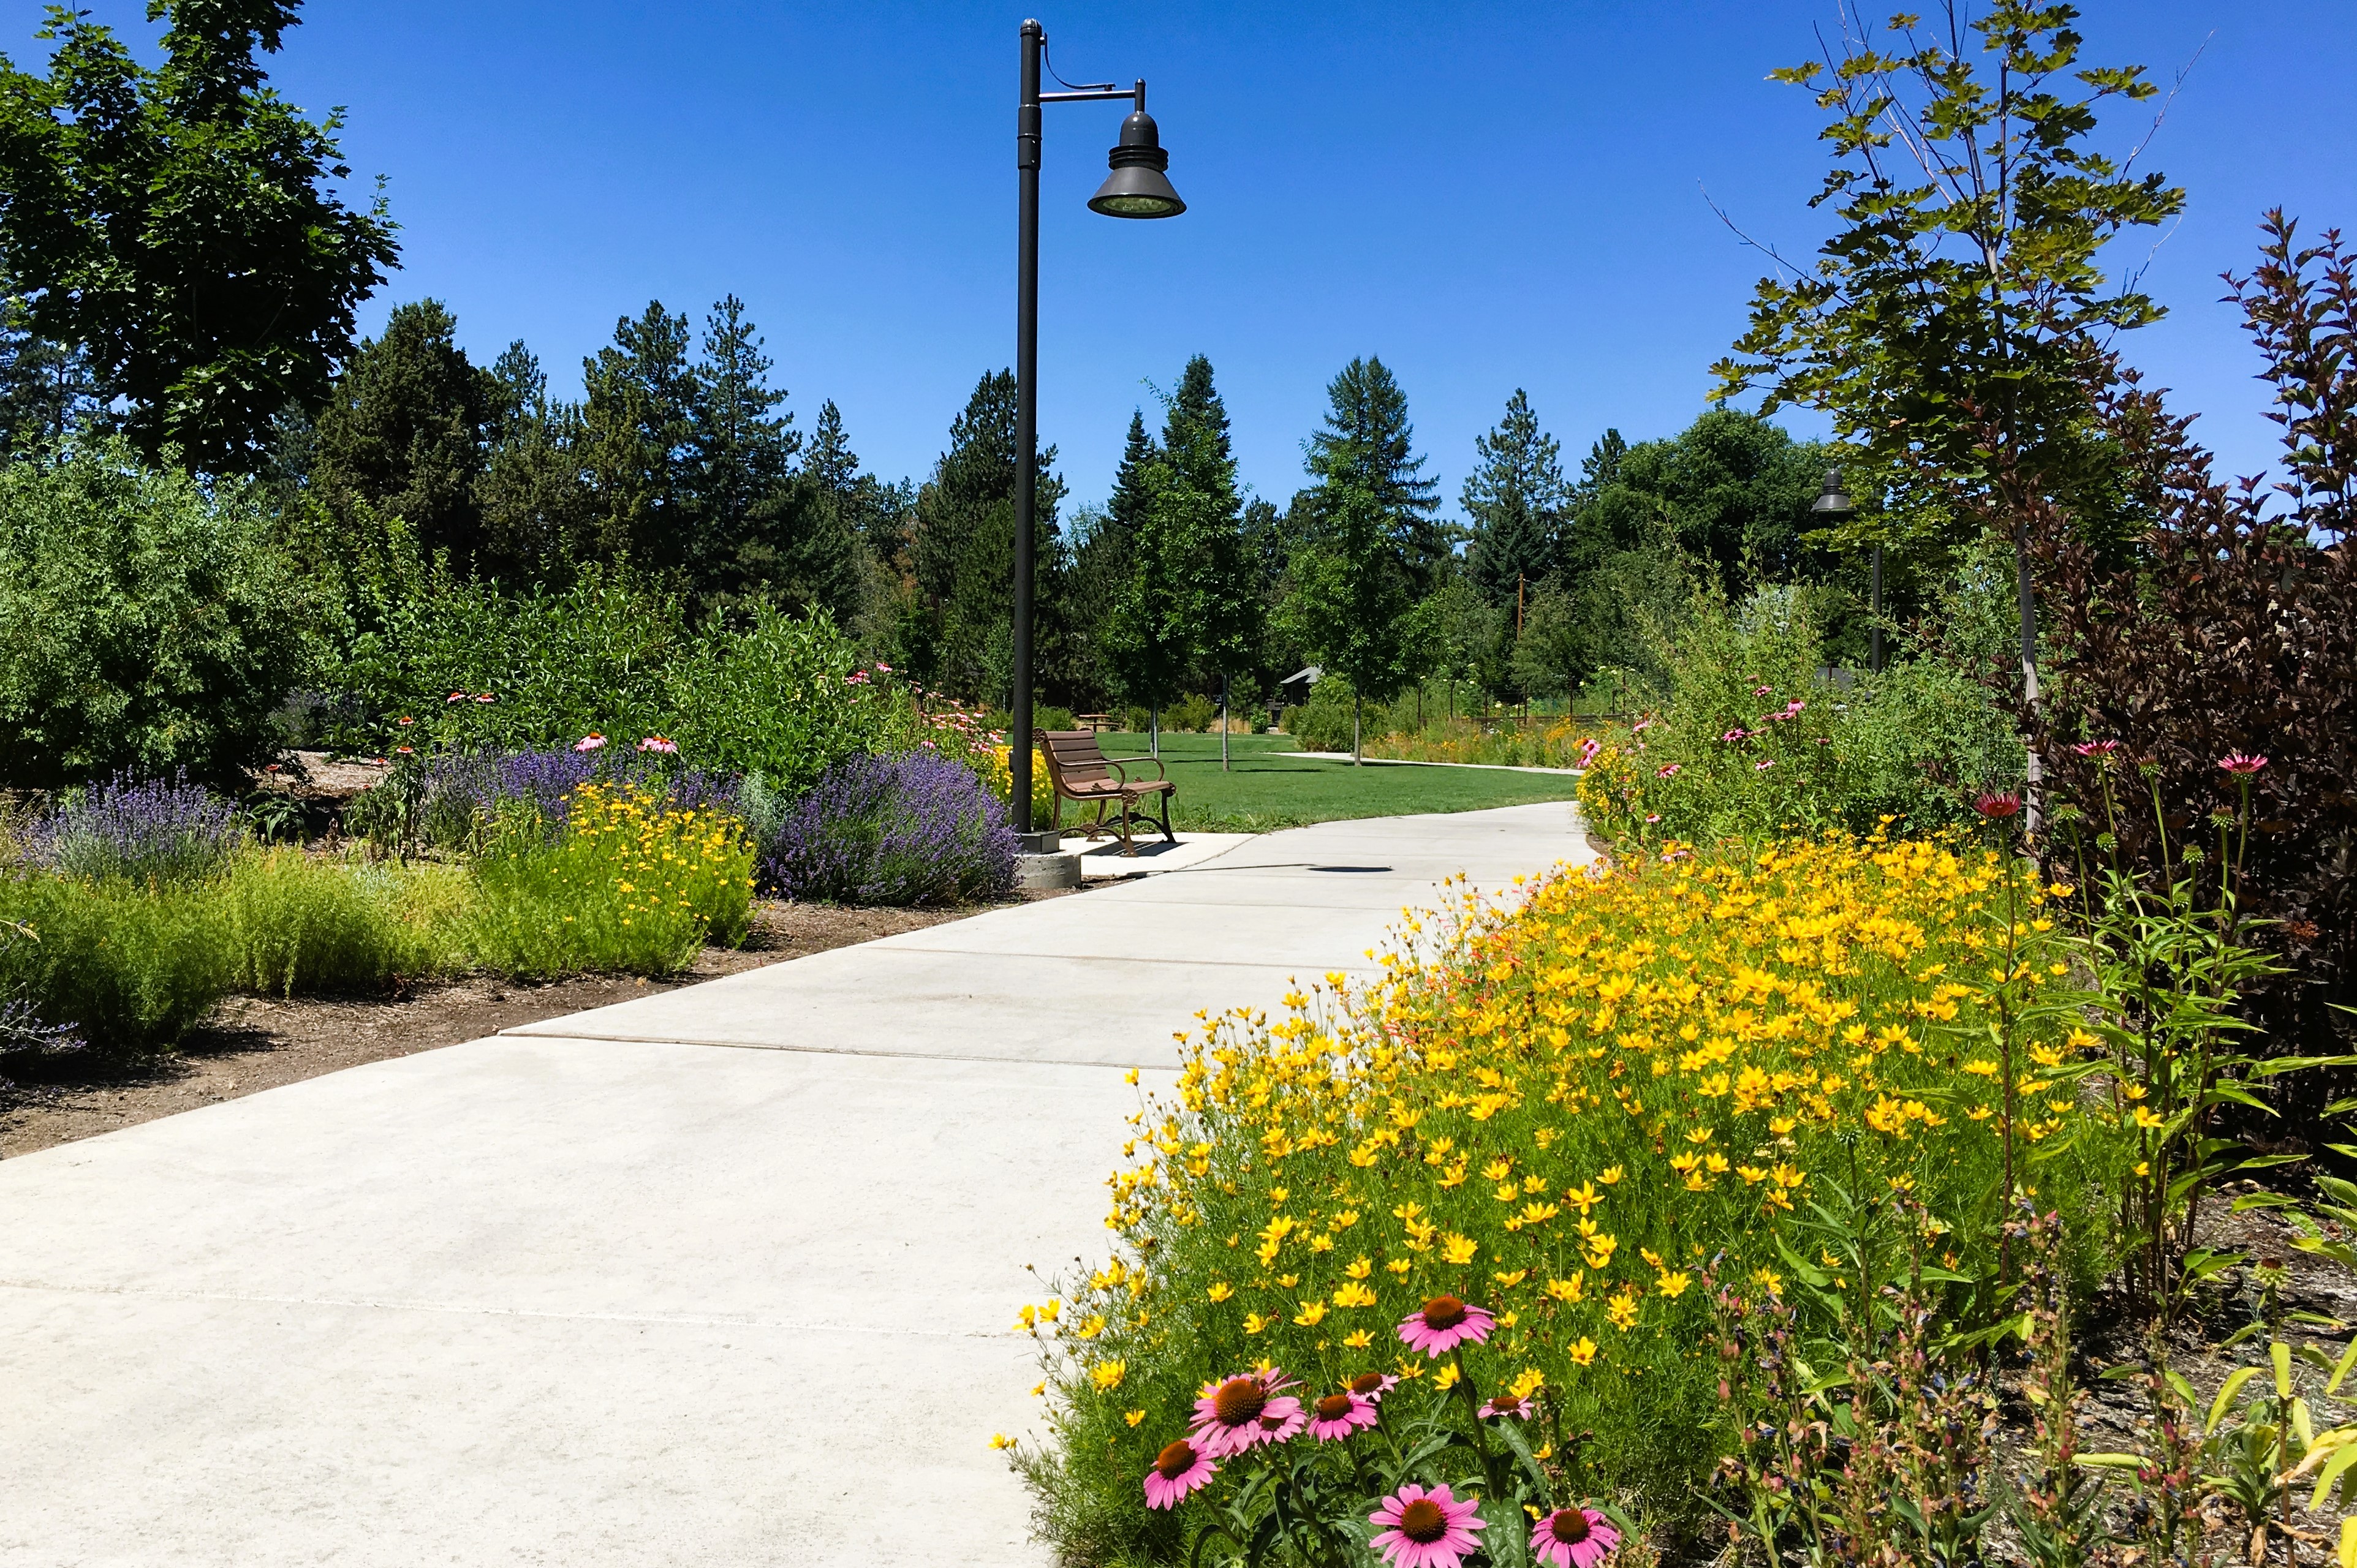 The pathway at millers landing surrounded by flowers